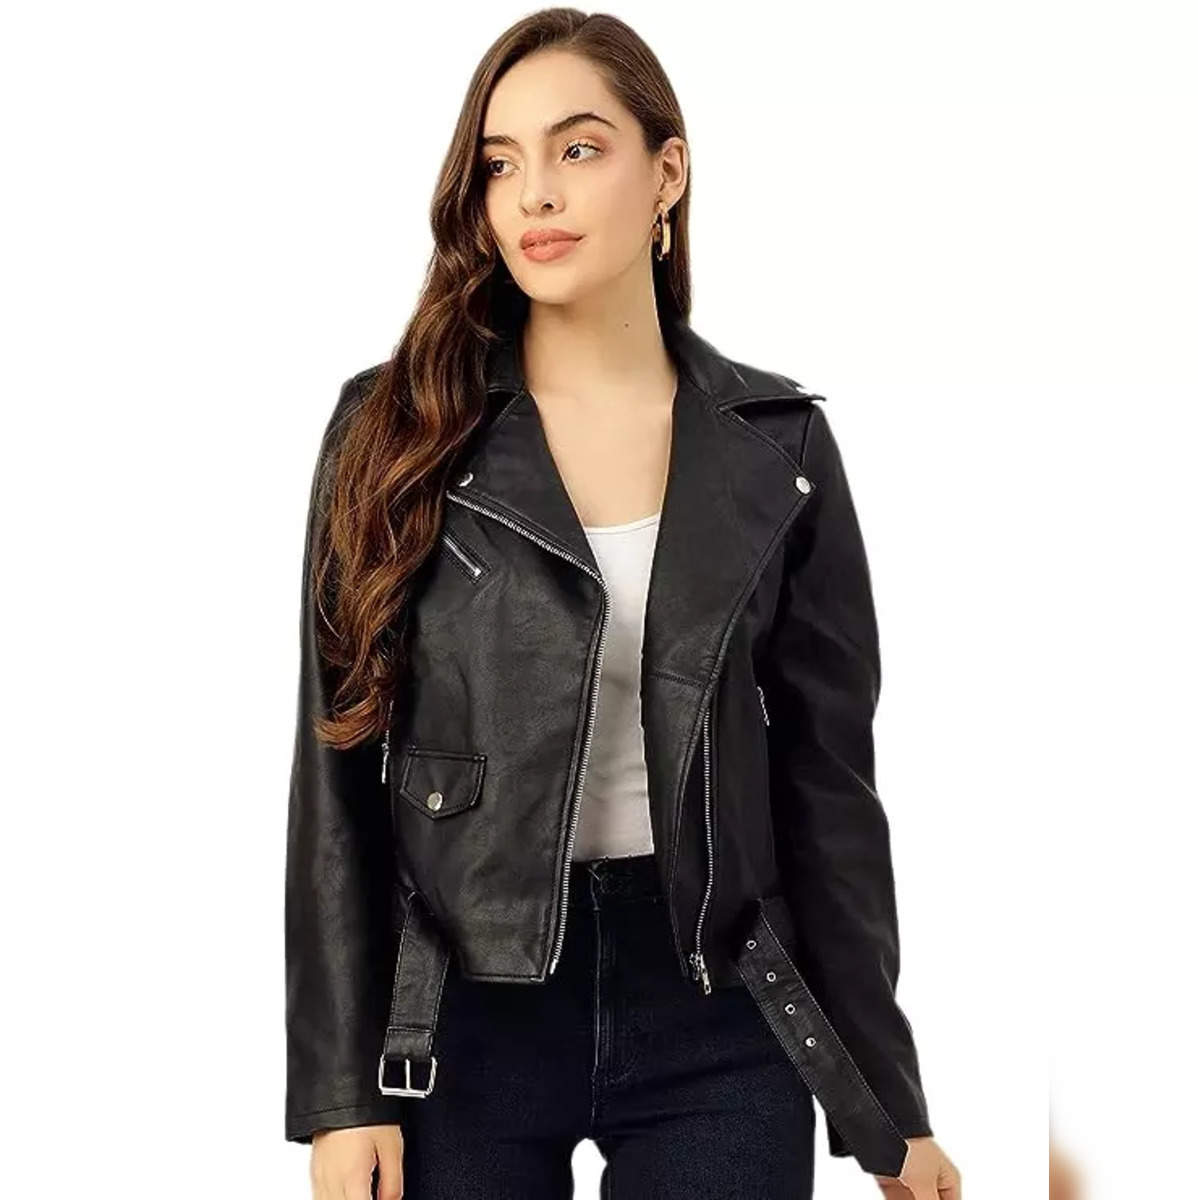 The Leather Jacket All The Cool Girls Will Be Wearing